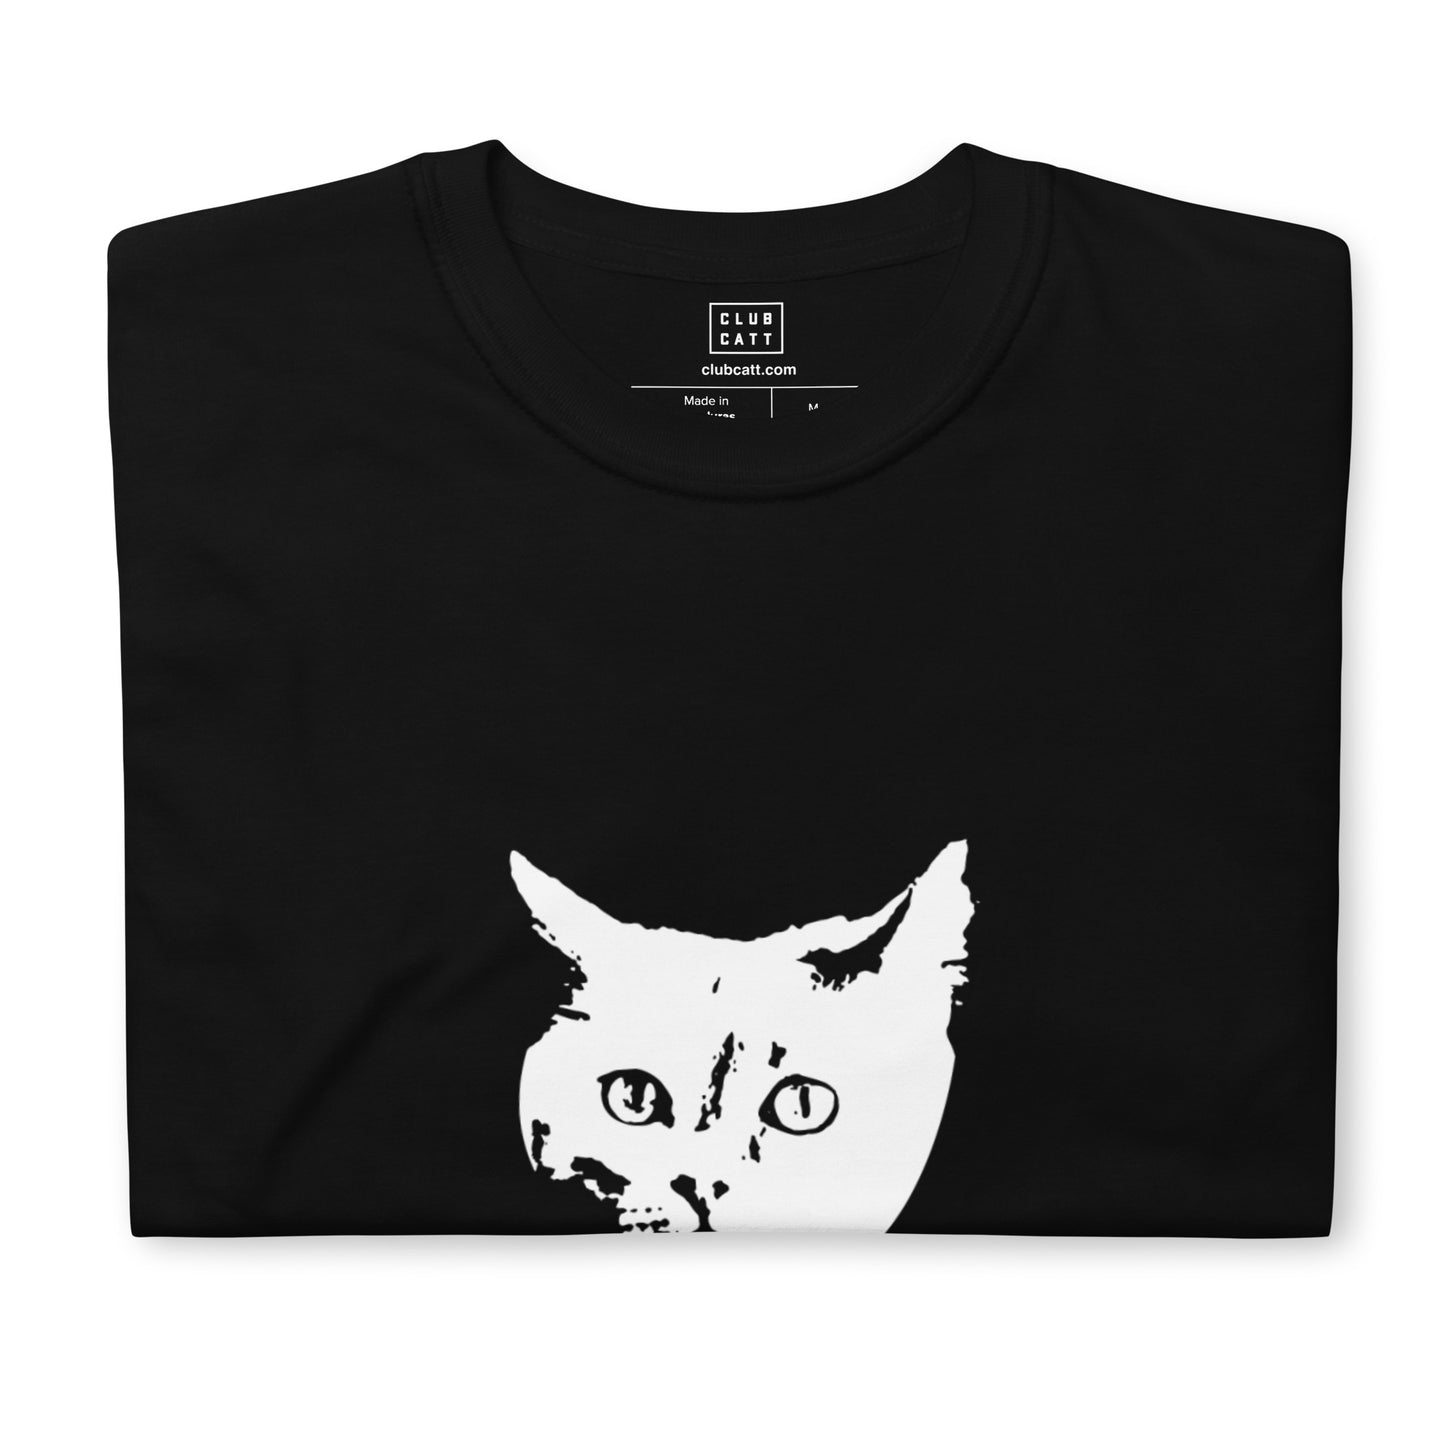 WILLOW Cat on T-Shirt